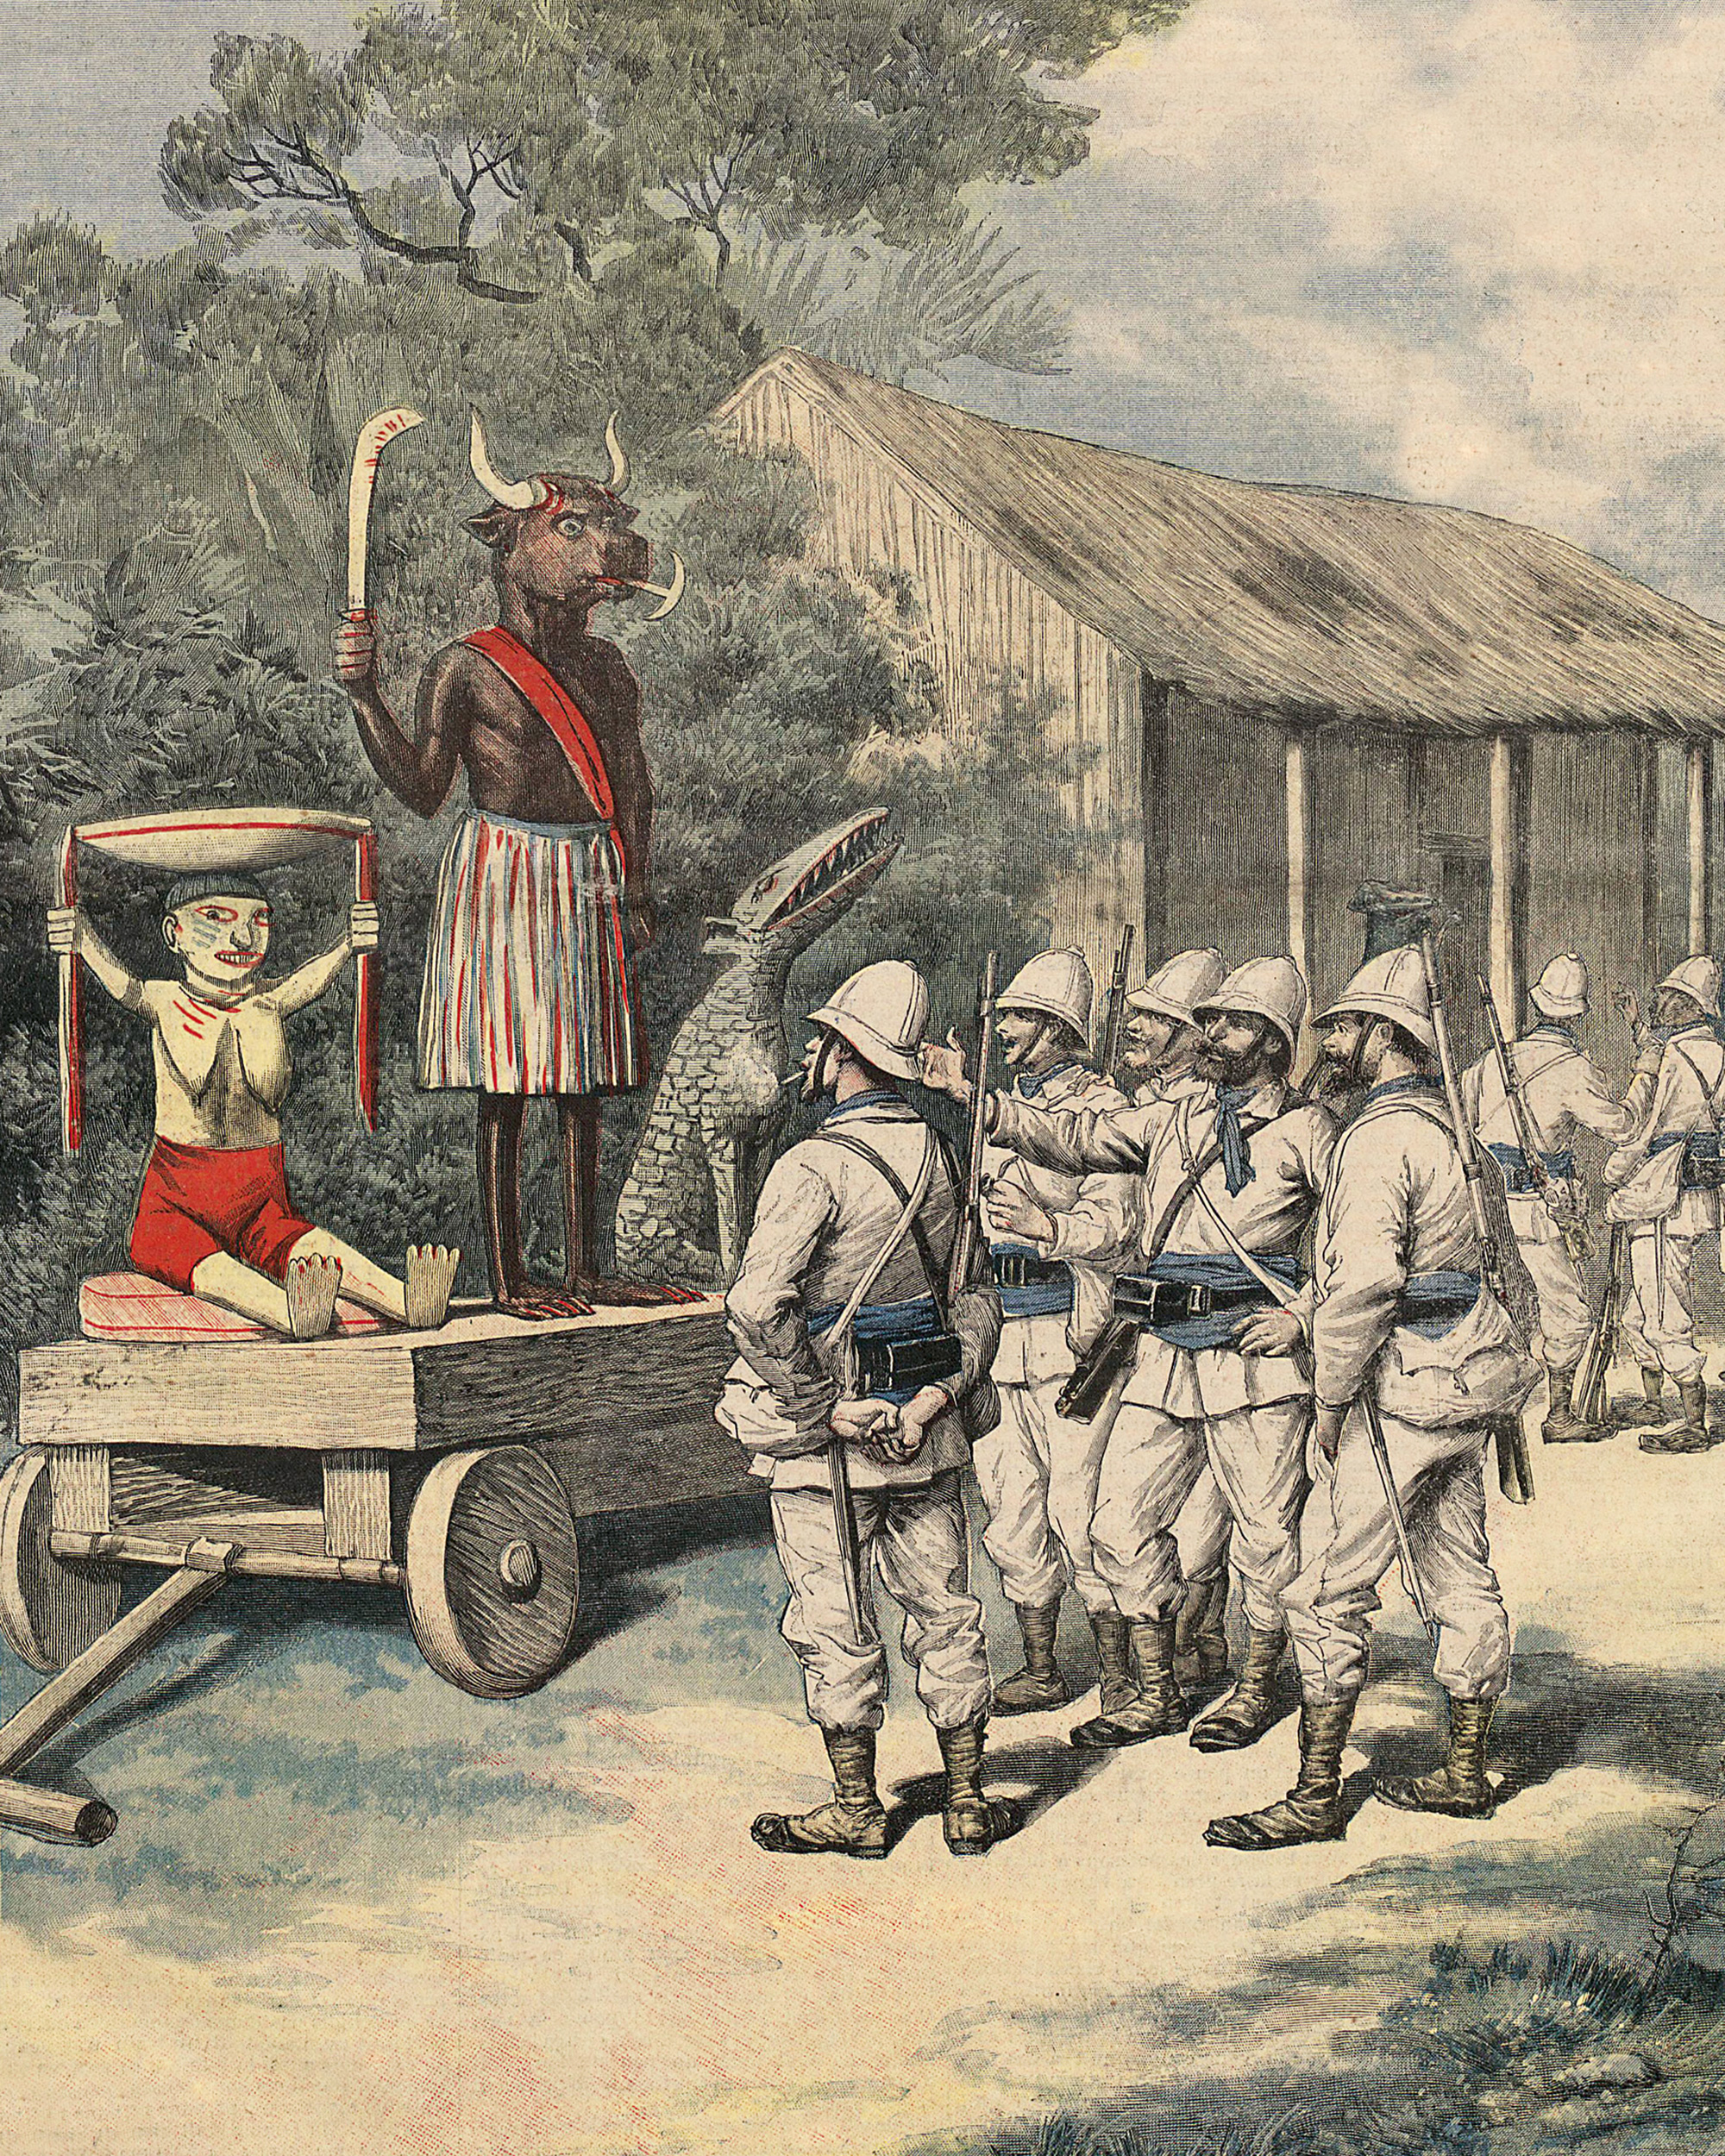 French soldiers at Cana examine captured Dahomean bocio. Unlike the statues taken from Abomey, these were destroyed. Image from Le Petit Journal: Supplément Illustré, 26 November 1892. Courtesy Bibliothèque nationale de France.